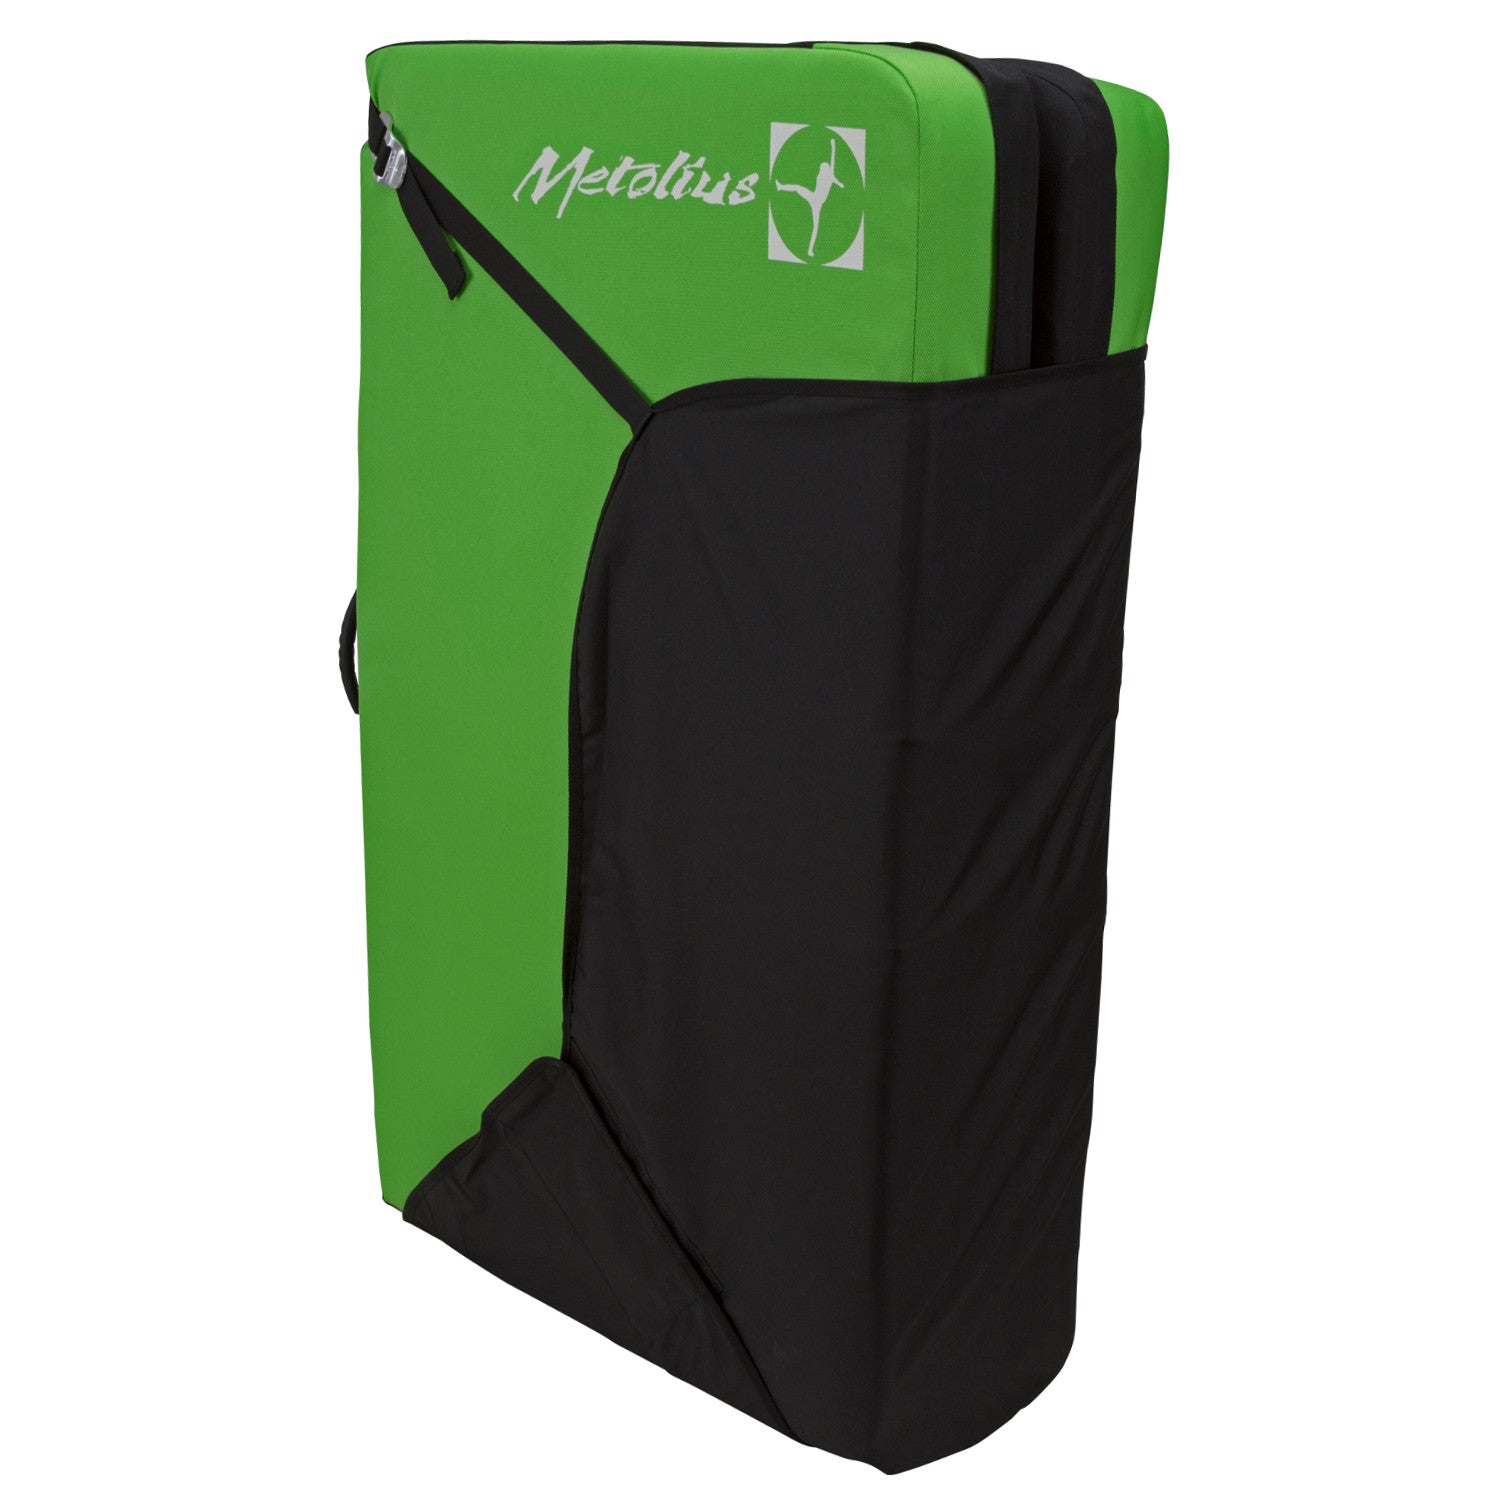 Metolius Session II crash pad, shown closed and stood upright in black and green